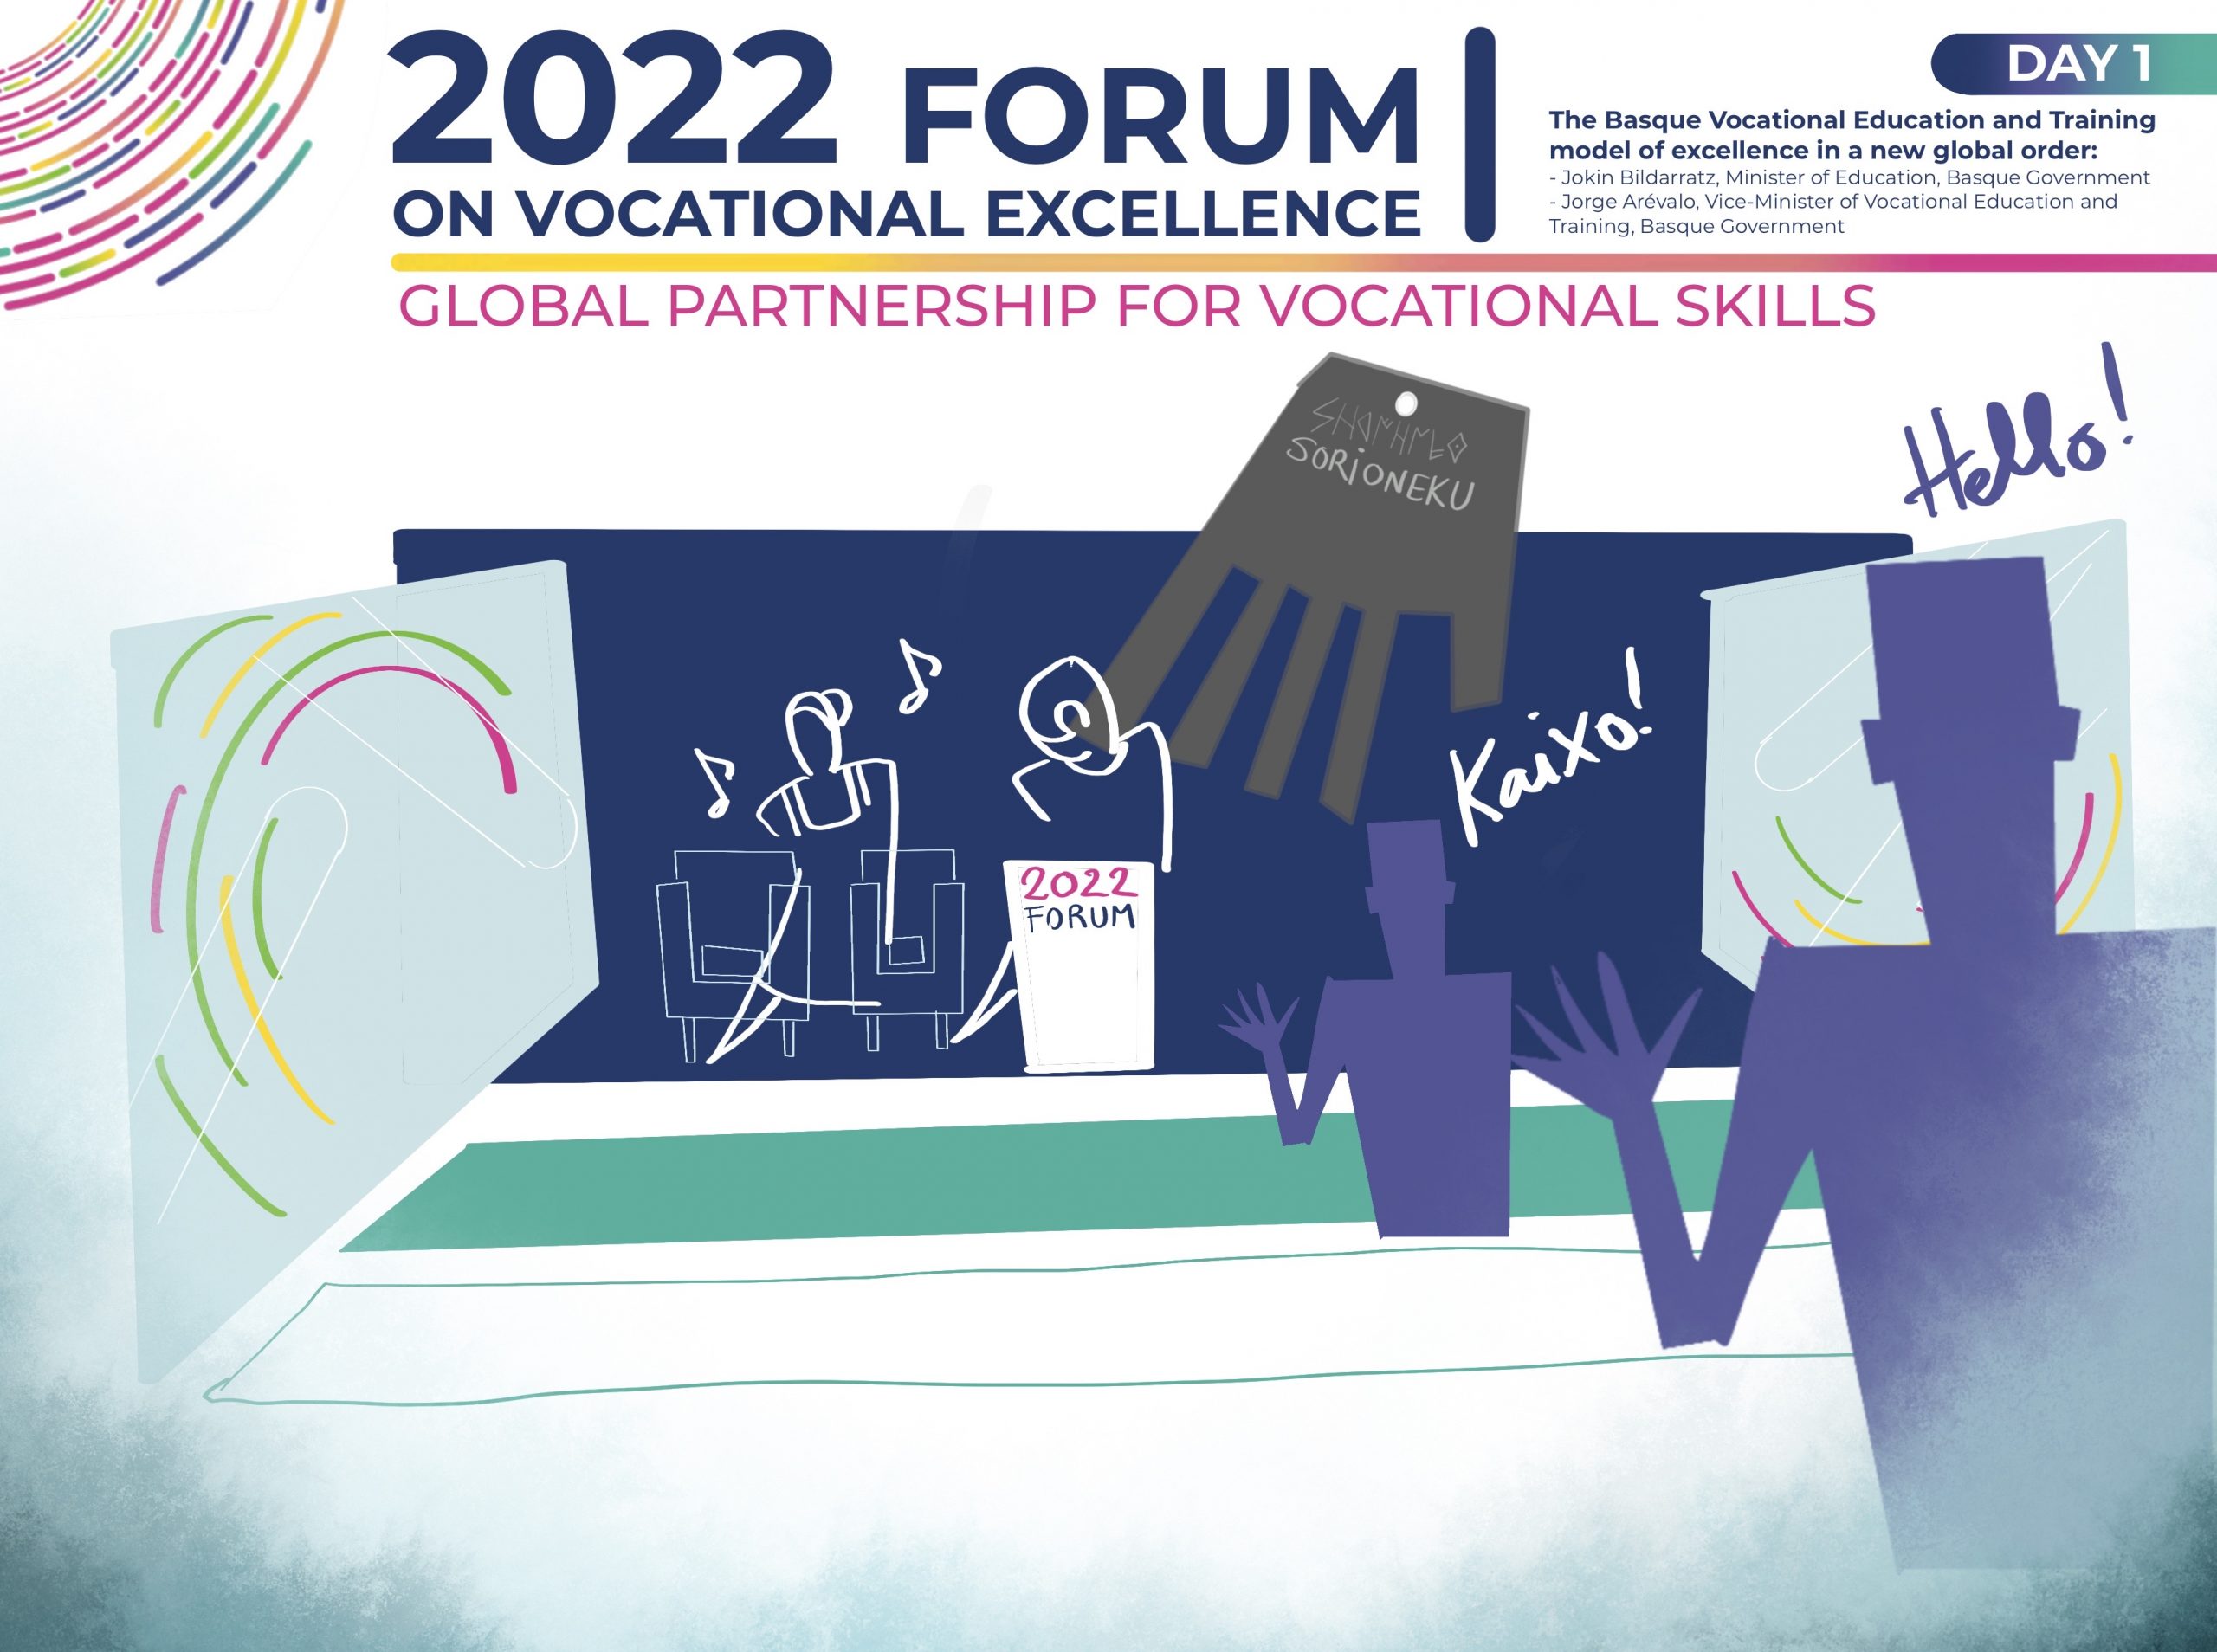 Forum on Vocational Excellence